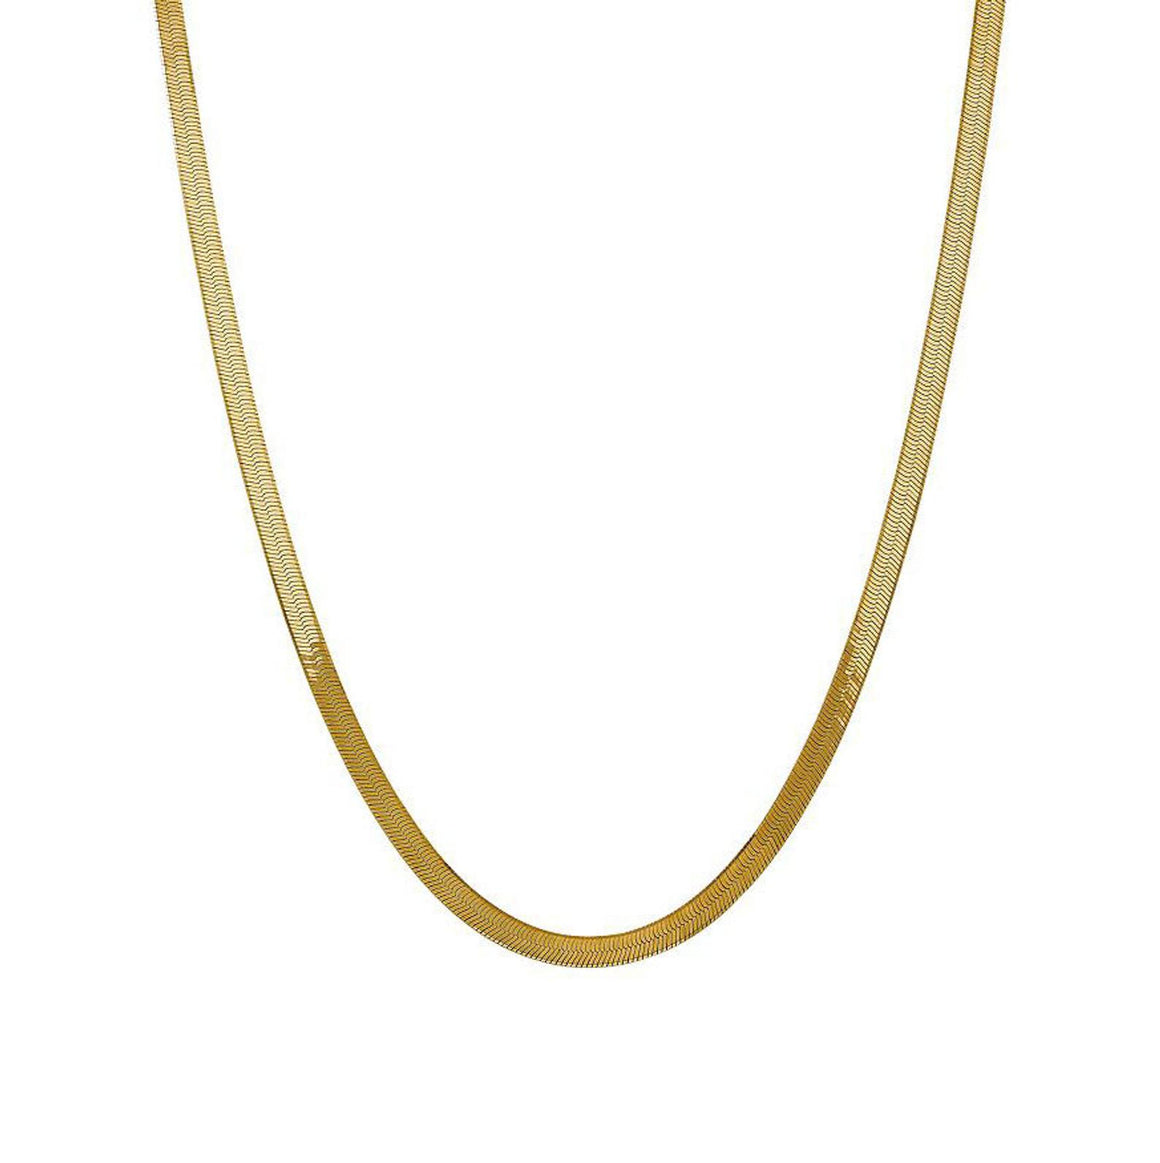 54 FLORAL 6mm HERRINGBONE FLAT CURB NECKLACE CHAIN - GOLD